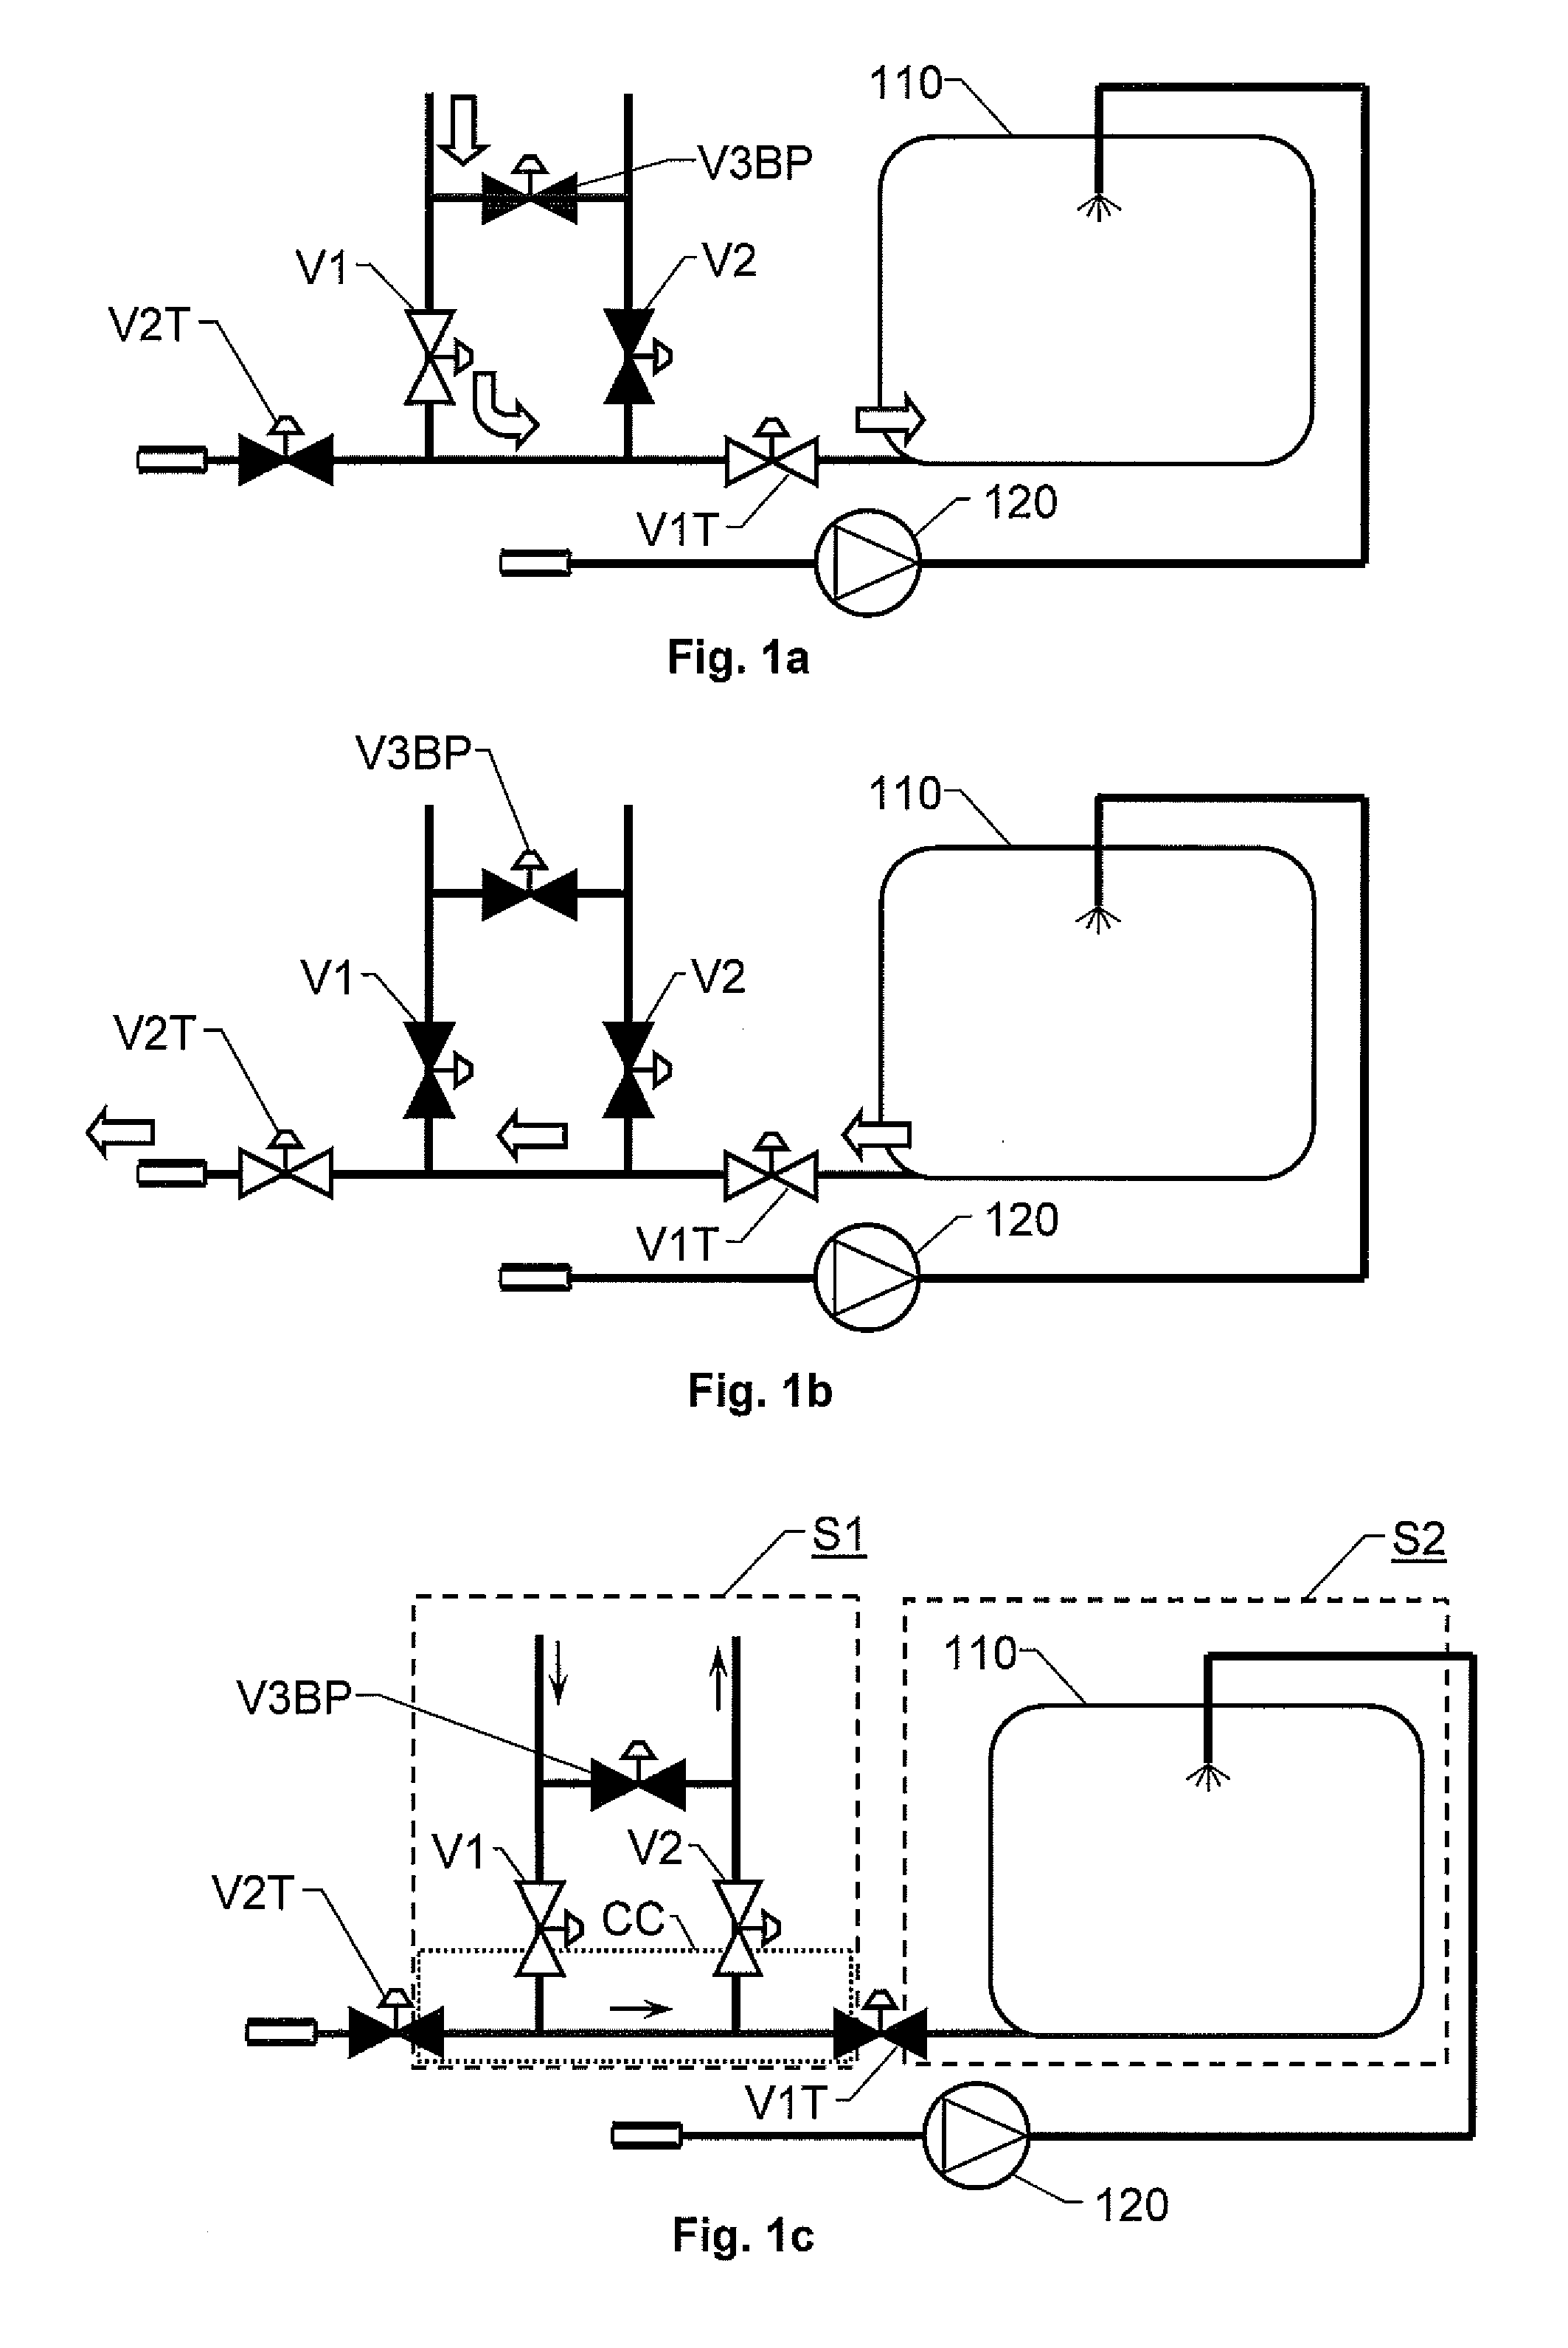 Independent cleaning of interfaces between separable fluid systems